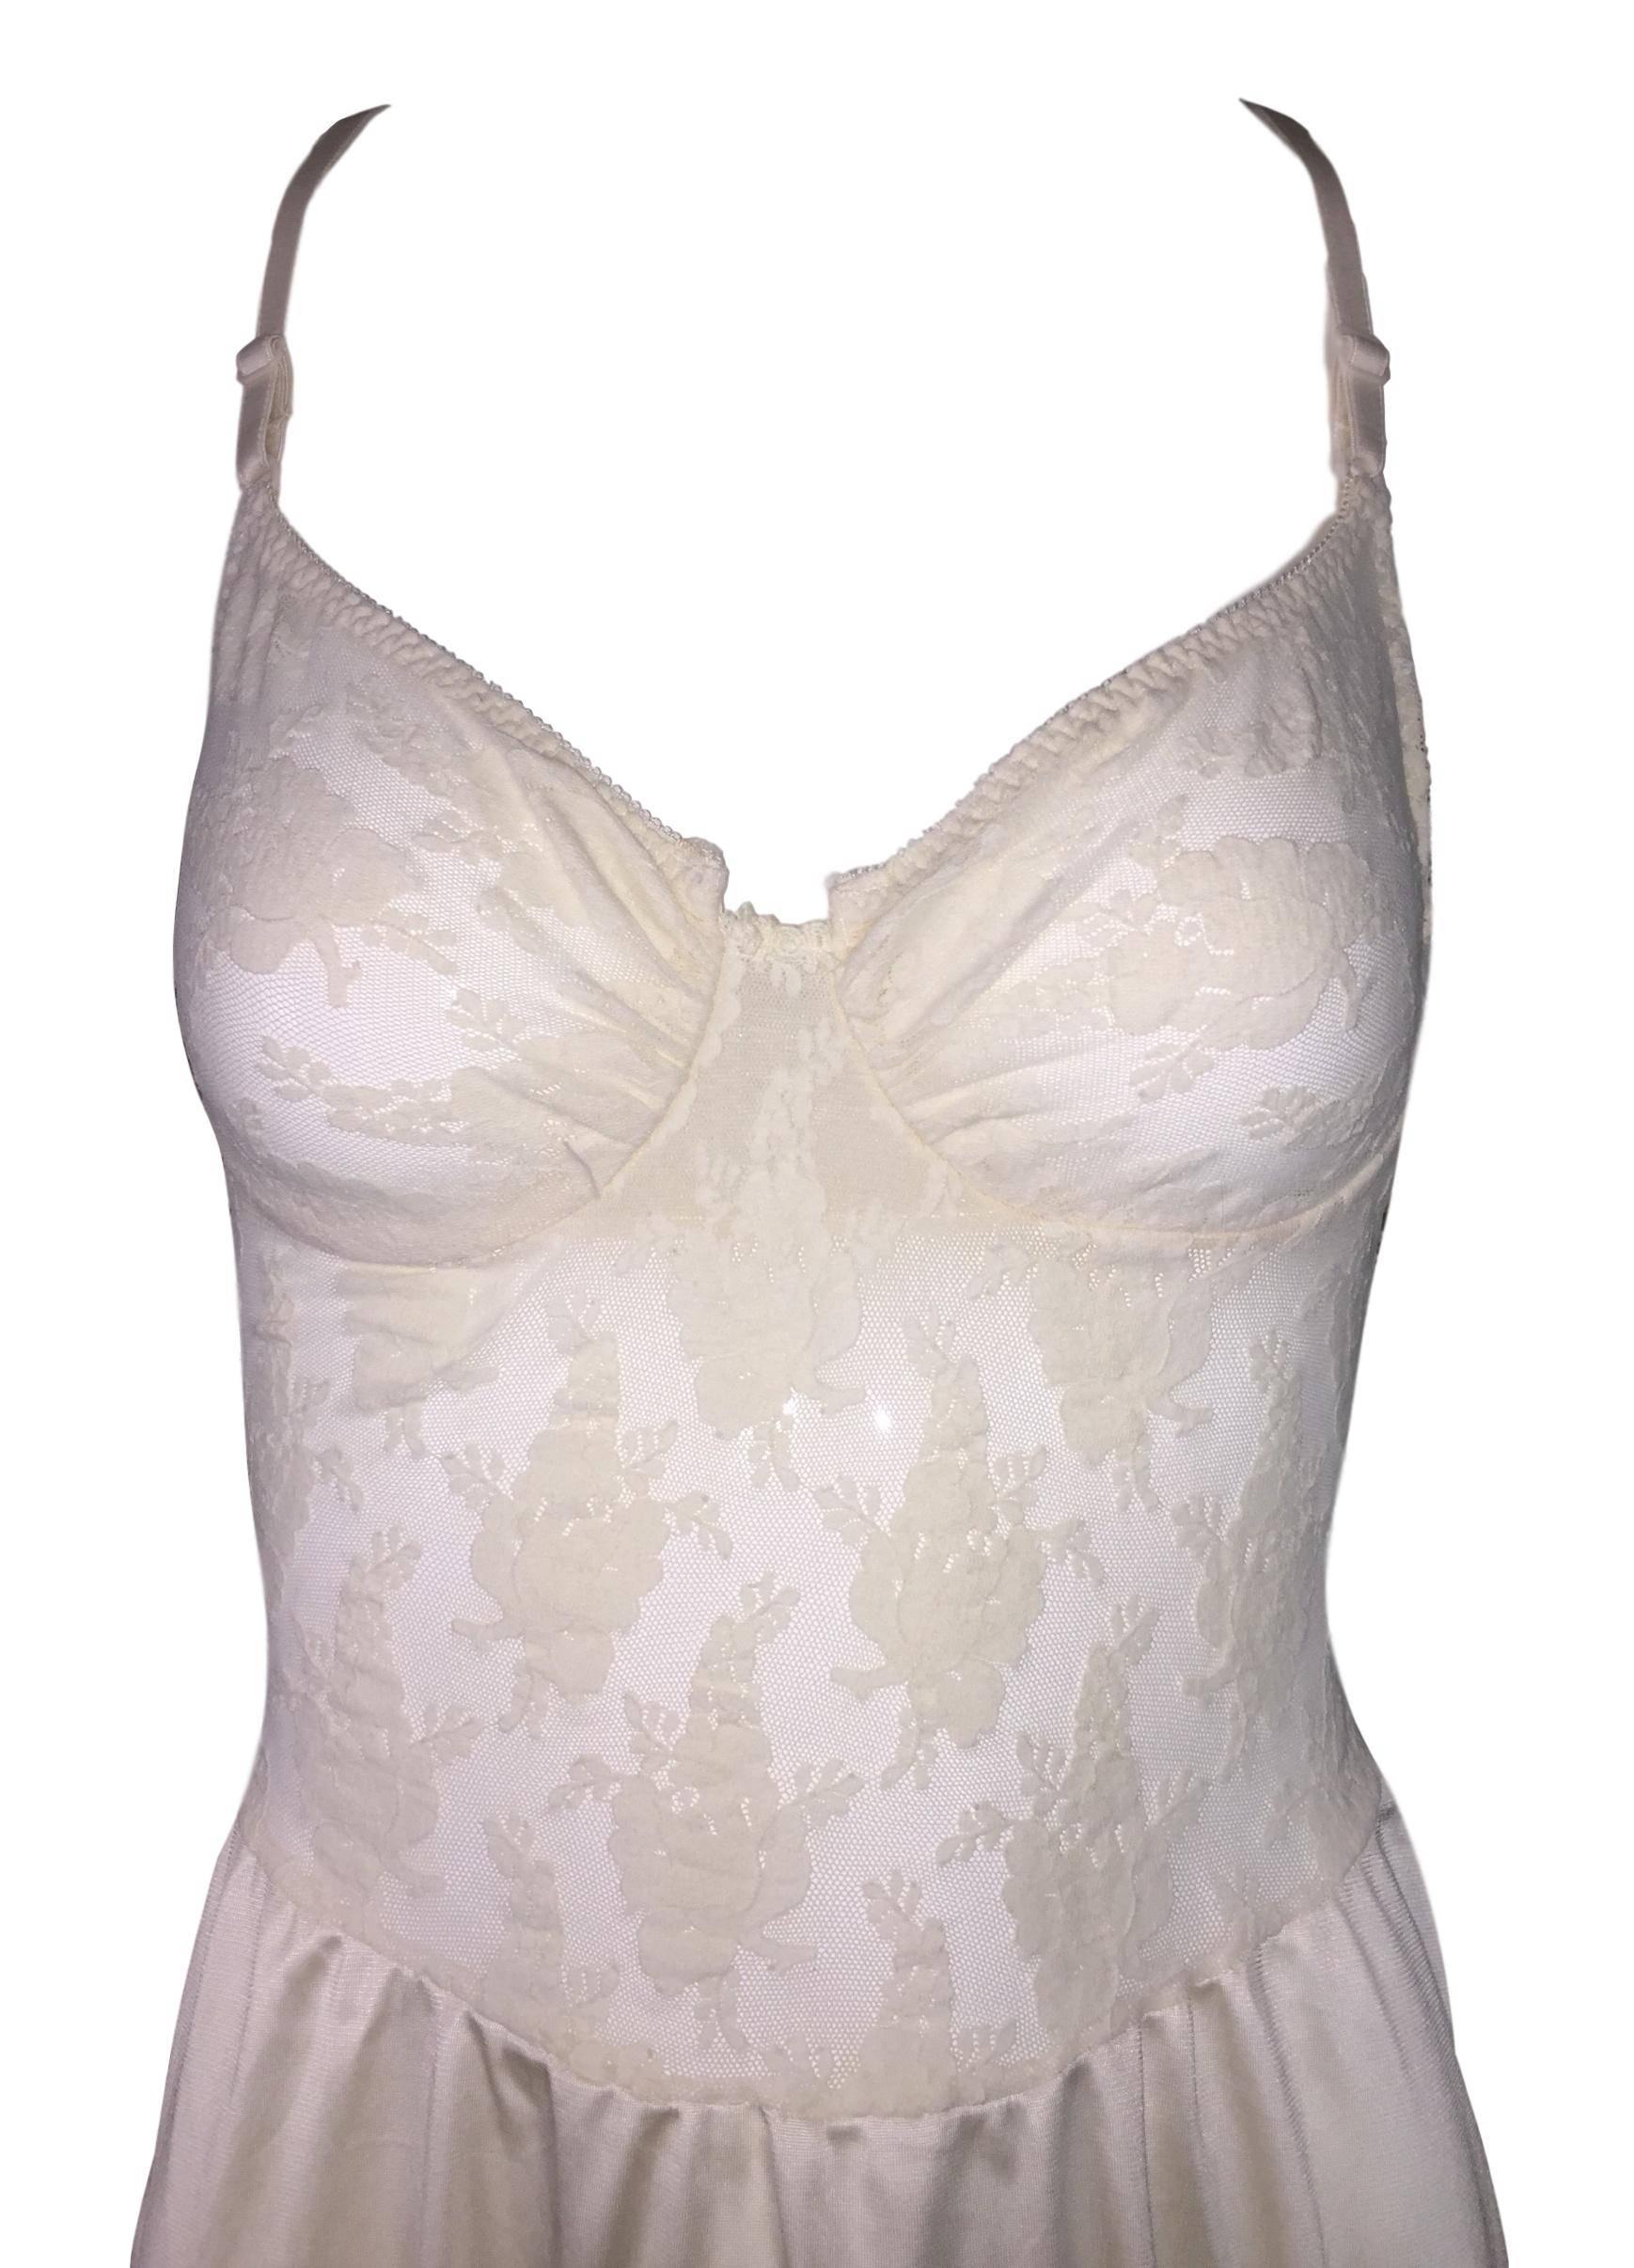 DESIGNER: 1990's Christian Dior

Please contact for more information and/or photos.

CONDITION: Good- no flaws!

FABRIC: 100% nylon

COUNTRY MADE: Dominican Republic

SIZE: 34B

MEASUREMENTS; provided as a courtesy only- not a guarantee of fit: